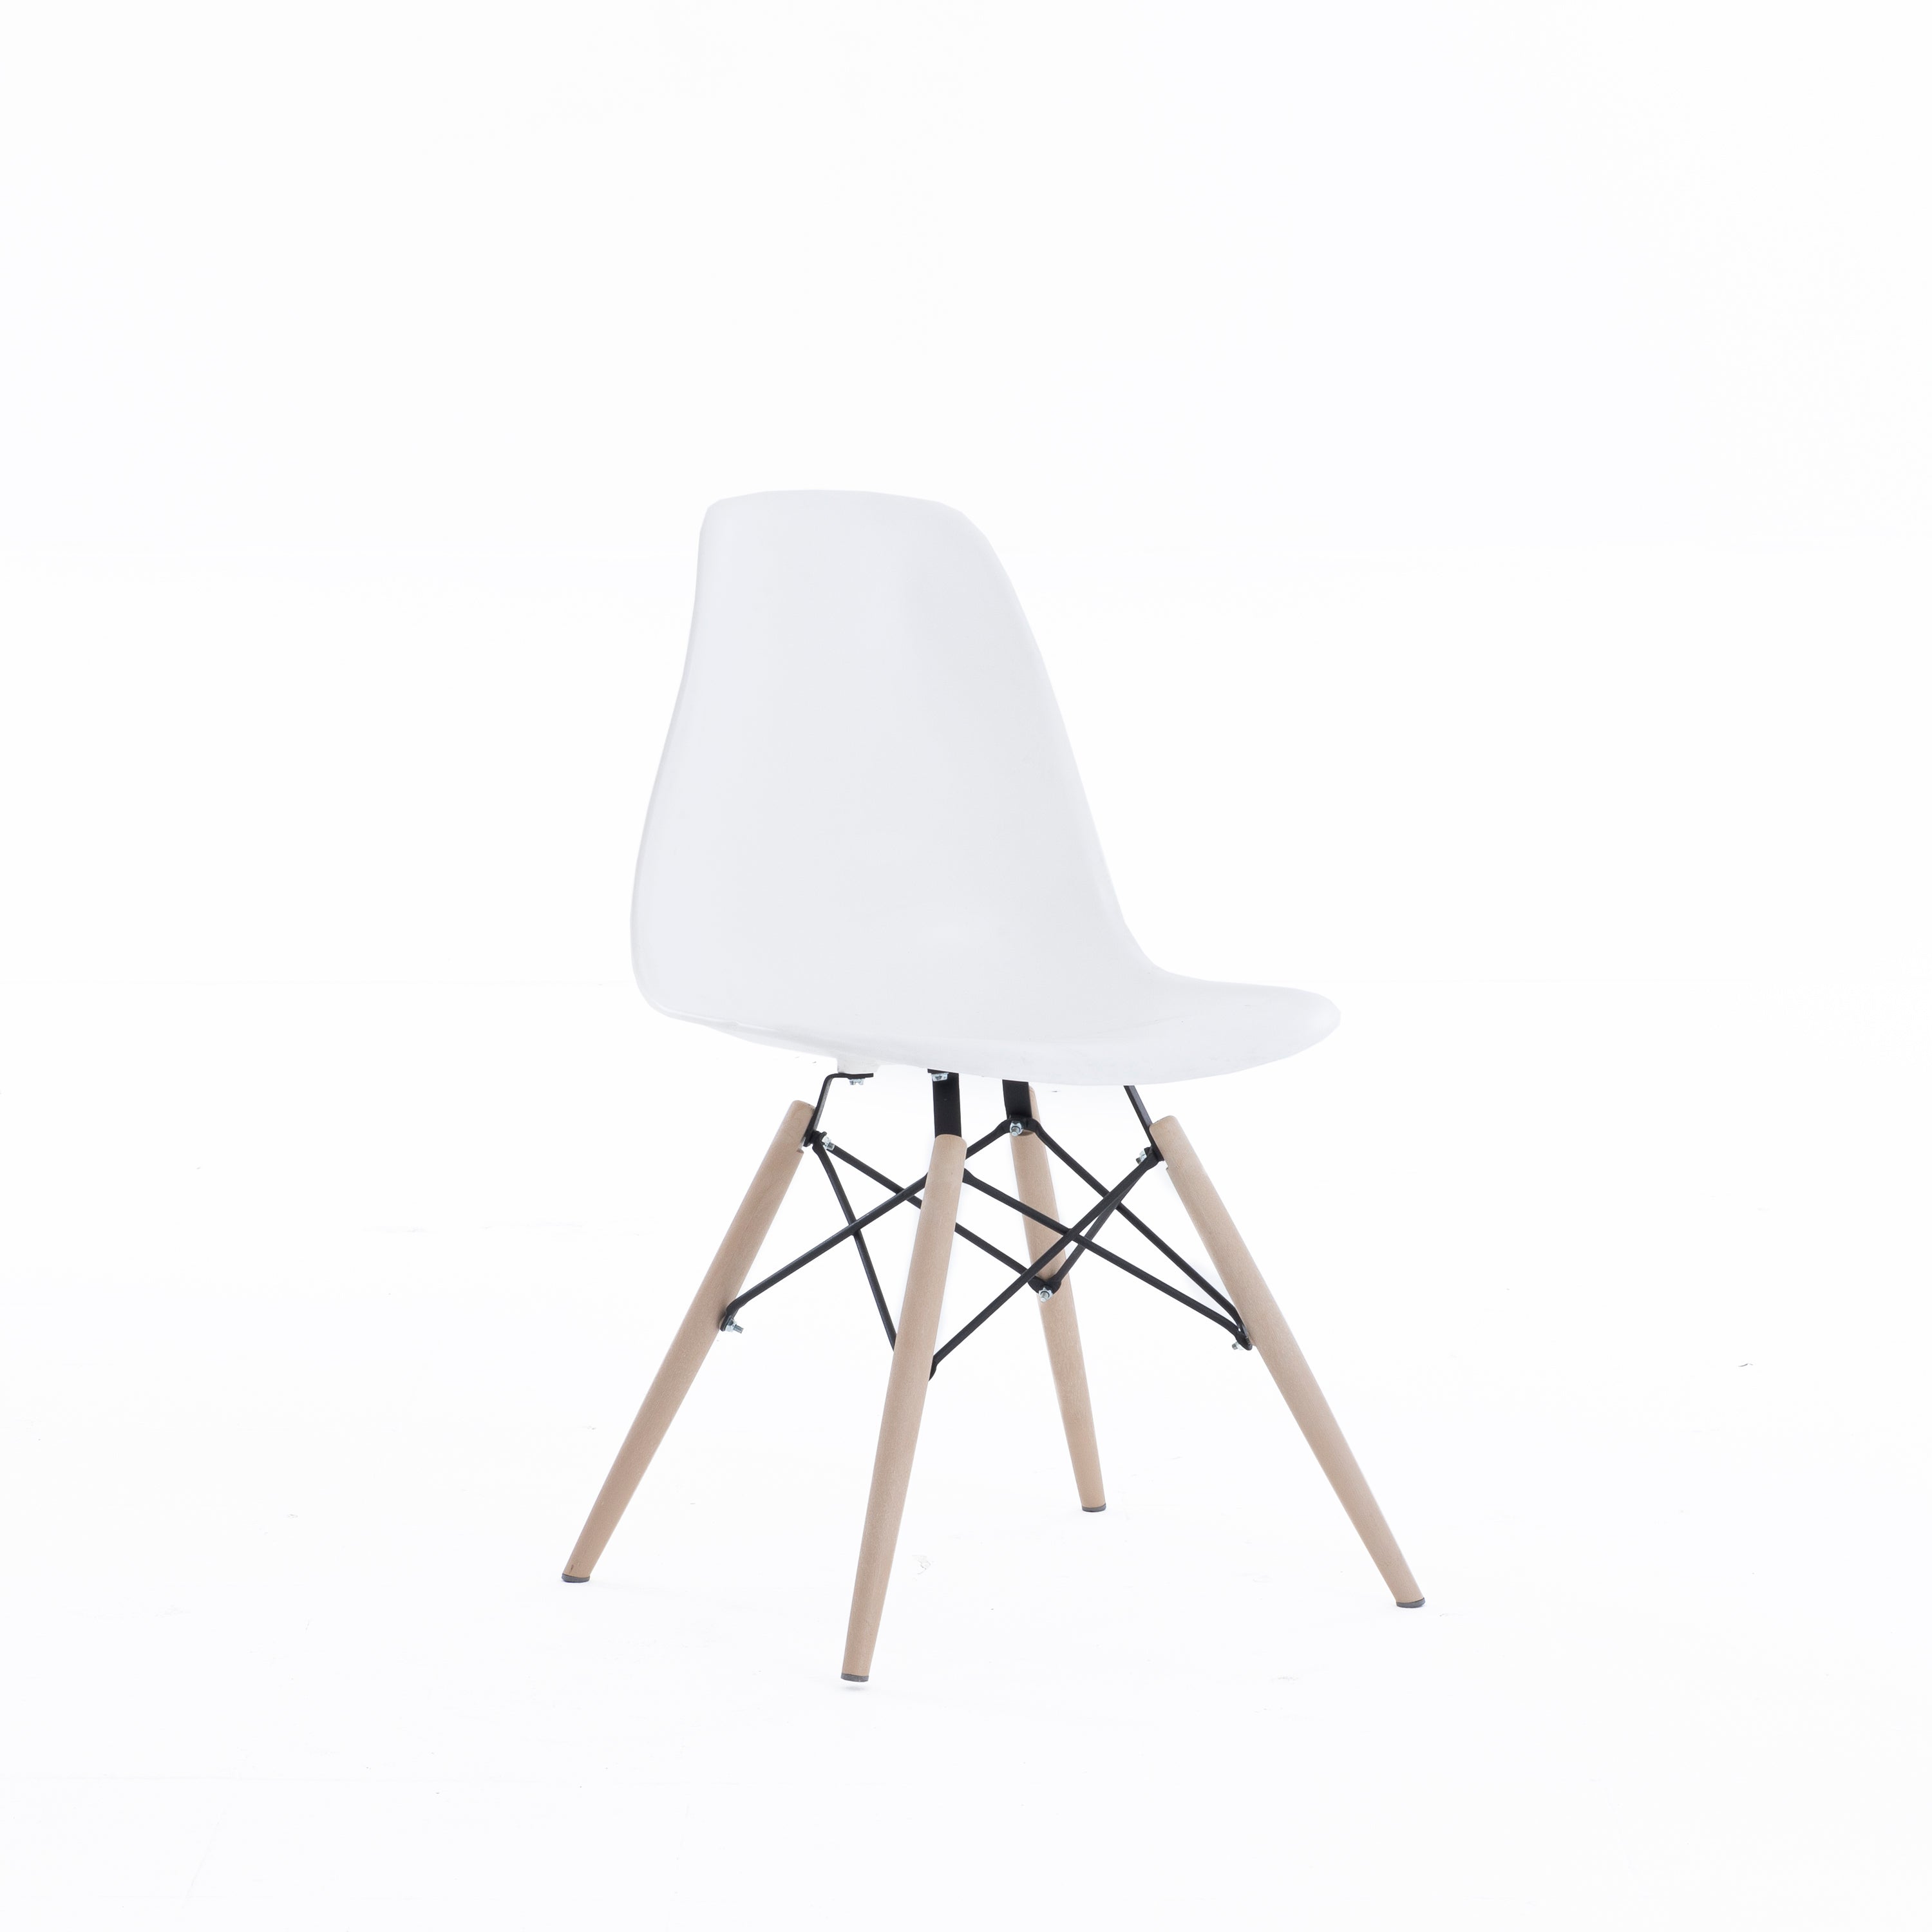 Tokyo Dining Chair - Set of 2